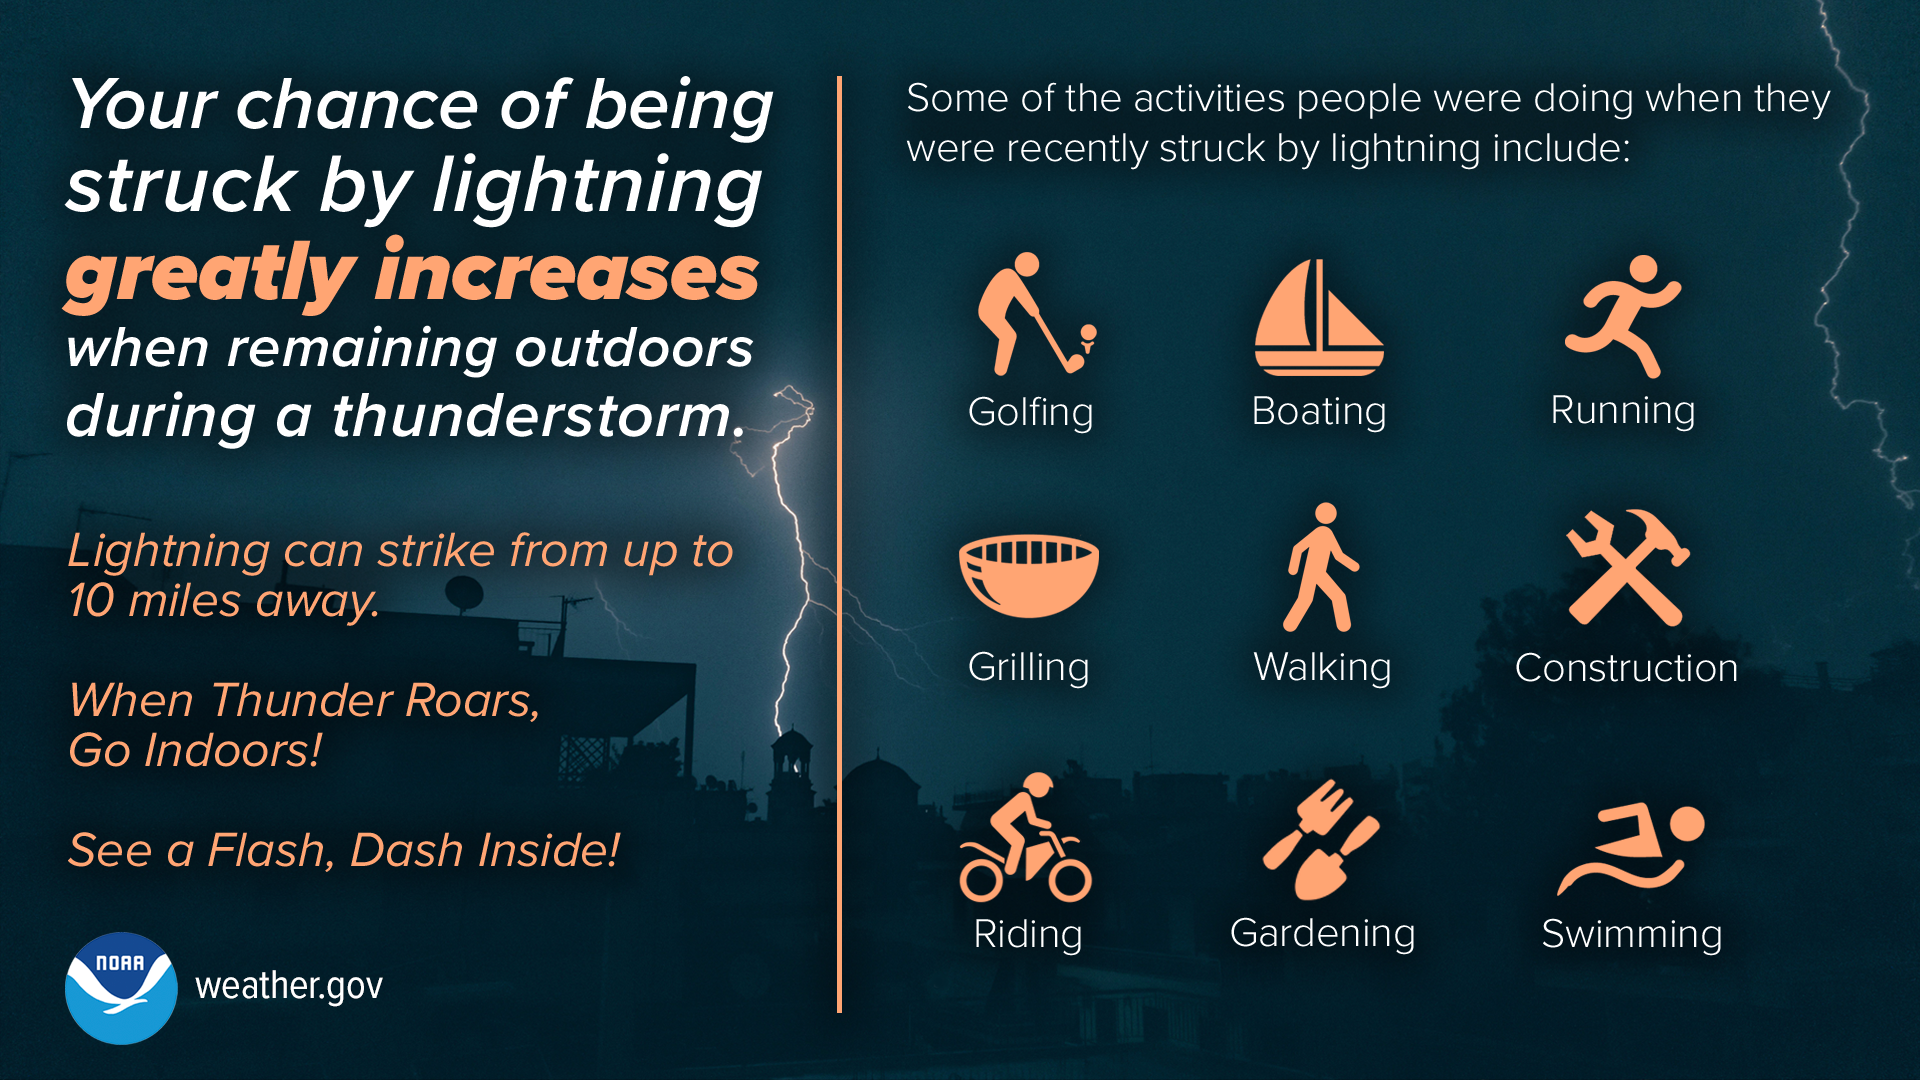 Your chance of being struck by lightning greatly increases when remaining outdoors during a thunderstorm. Lightning can strike from up to 10 miles away. When Thunder Roars, Go Indoors!